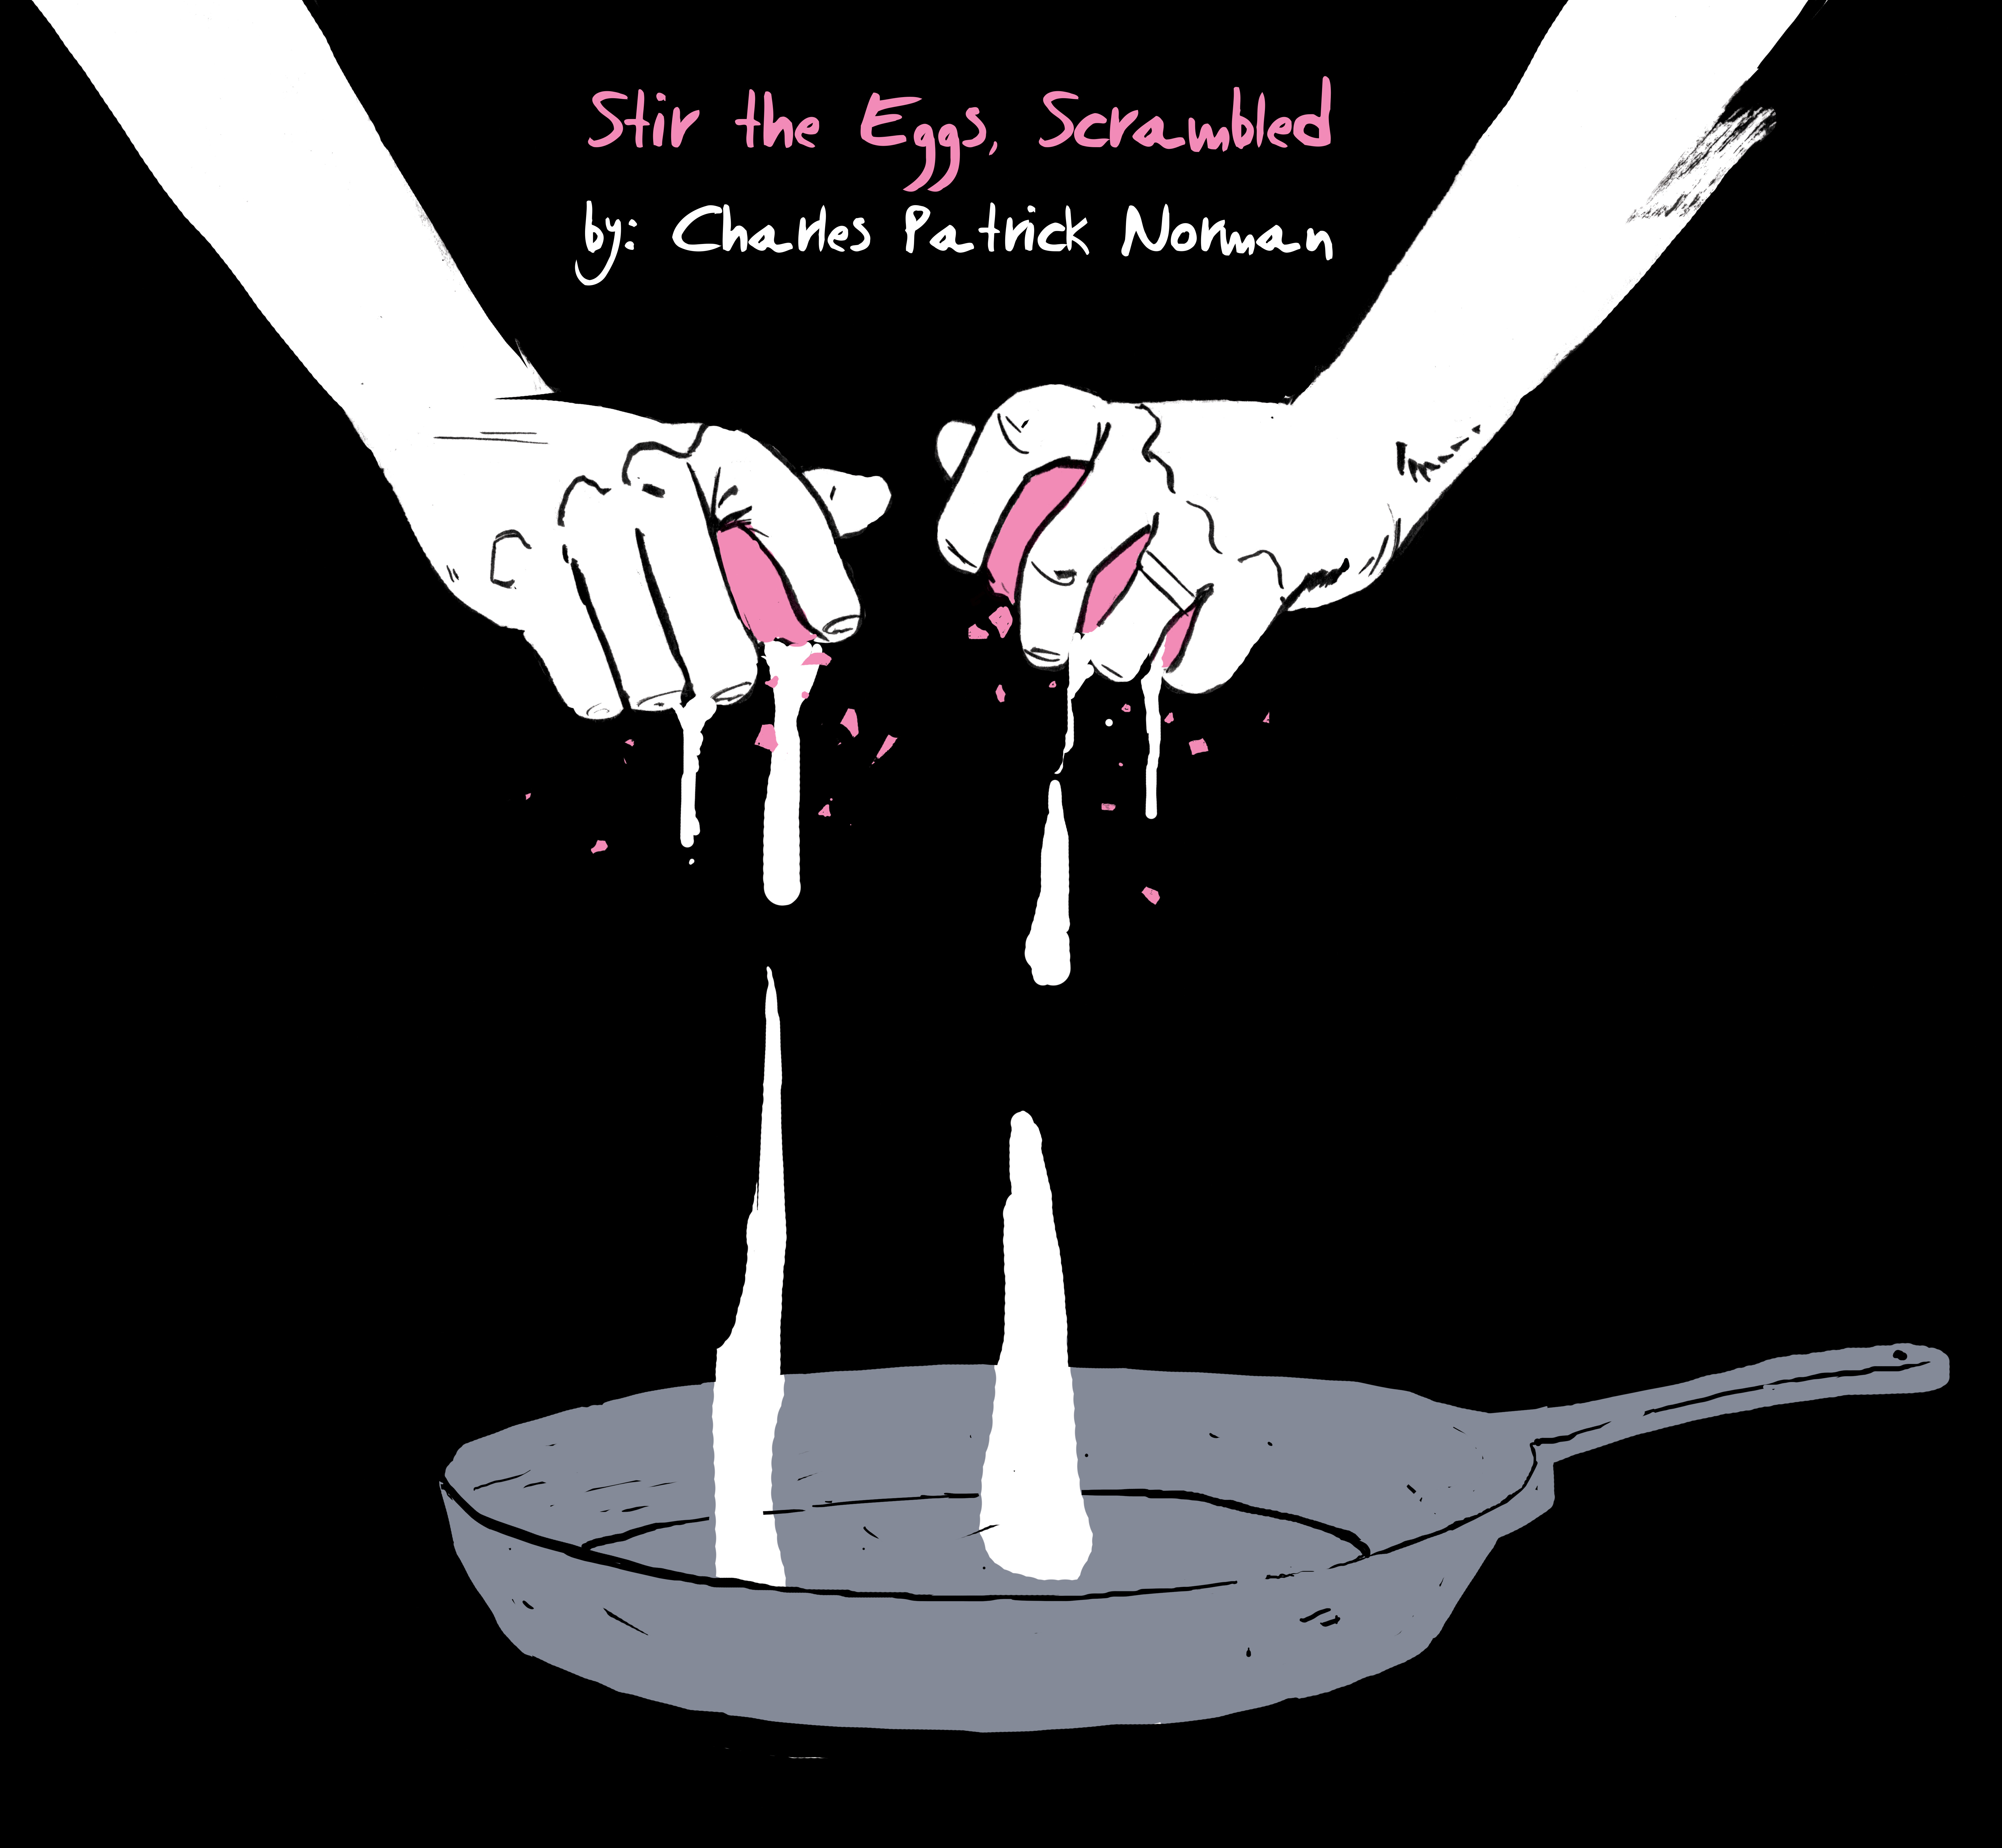 Stir the Eggs, Scrambled, by Charles Patrick Norman